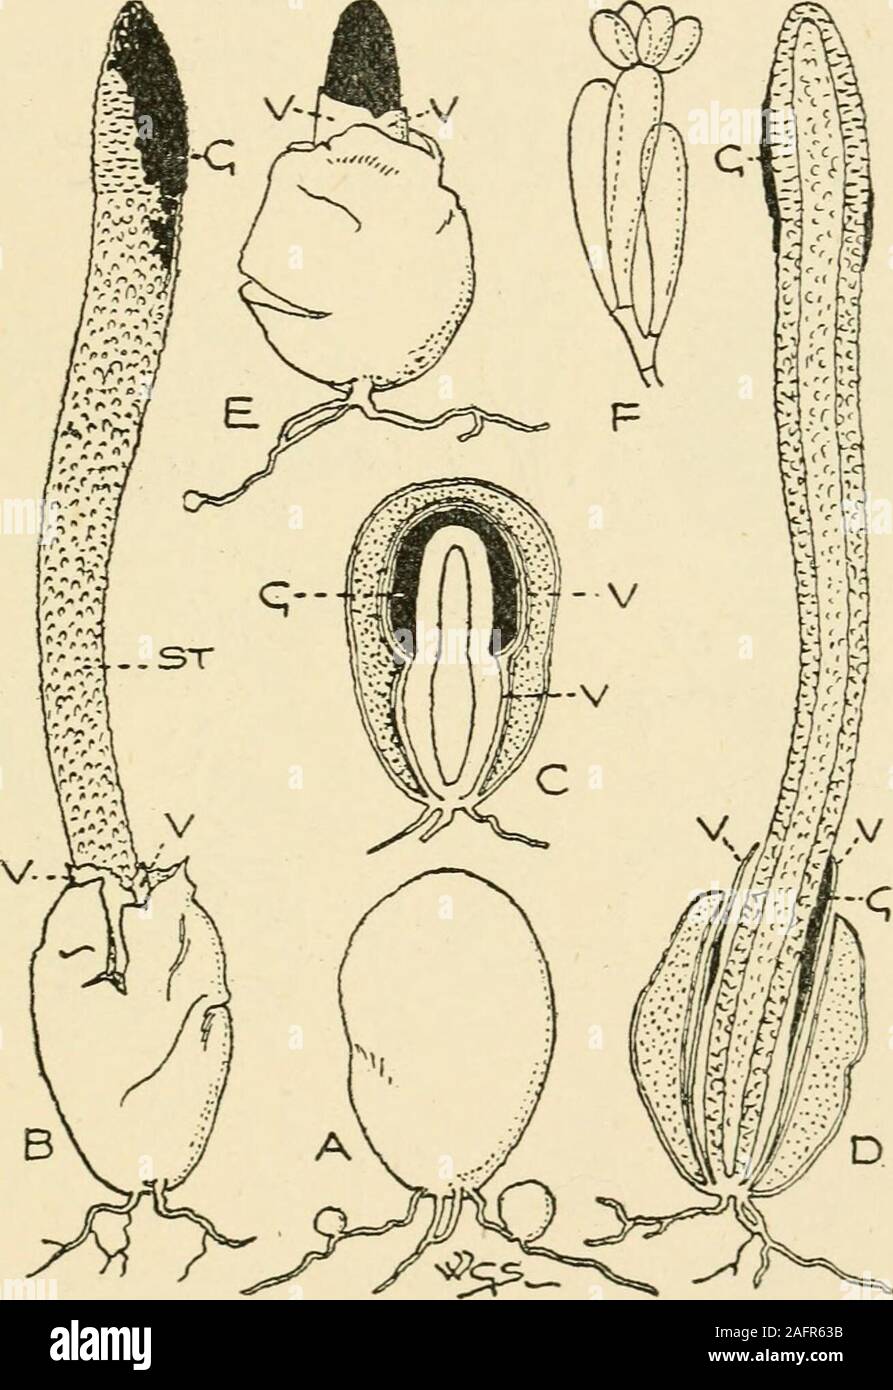 . Synopsis of the British Basidiomycetes ; a descriptive catalogue of the drawings and specimens in the Department of botany, British museum. Fig. 123.—Ithyphallus impudicus Fisch. Two-thirds natural size.a, young plant, b, section of ditto, showing veil at v. c, ditto,  showing pileus emergingfrom voU-a, veil at v. d, mature plant, remains of veil at v. e, section of ditto, f, basidiumand spores, X 1000. g, gleba ; st, stem or receptacle. Mutinus PHALLOIDACEiE 461 CVIII. MUTINUS Fr. (An appellation of Priapus.) Pileus adnate to the hollow, perforate or imperforate spongy-stem, at first immers Stock Photo